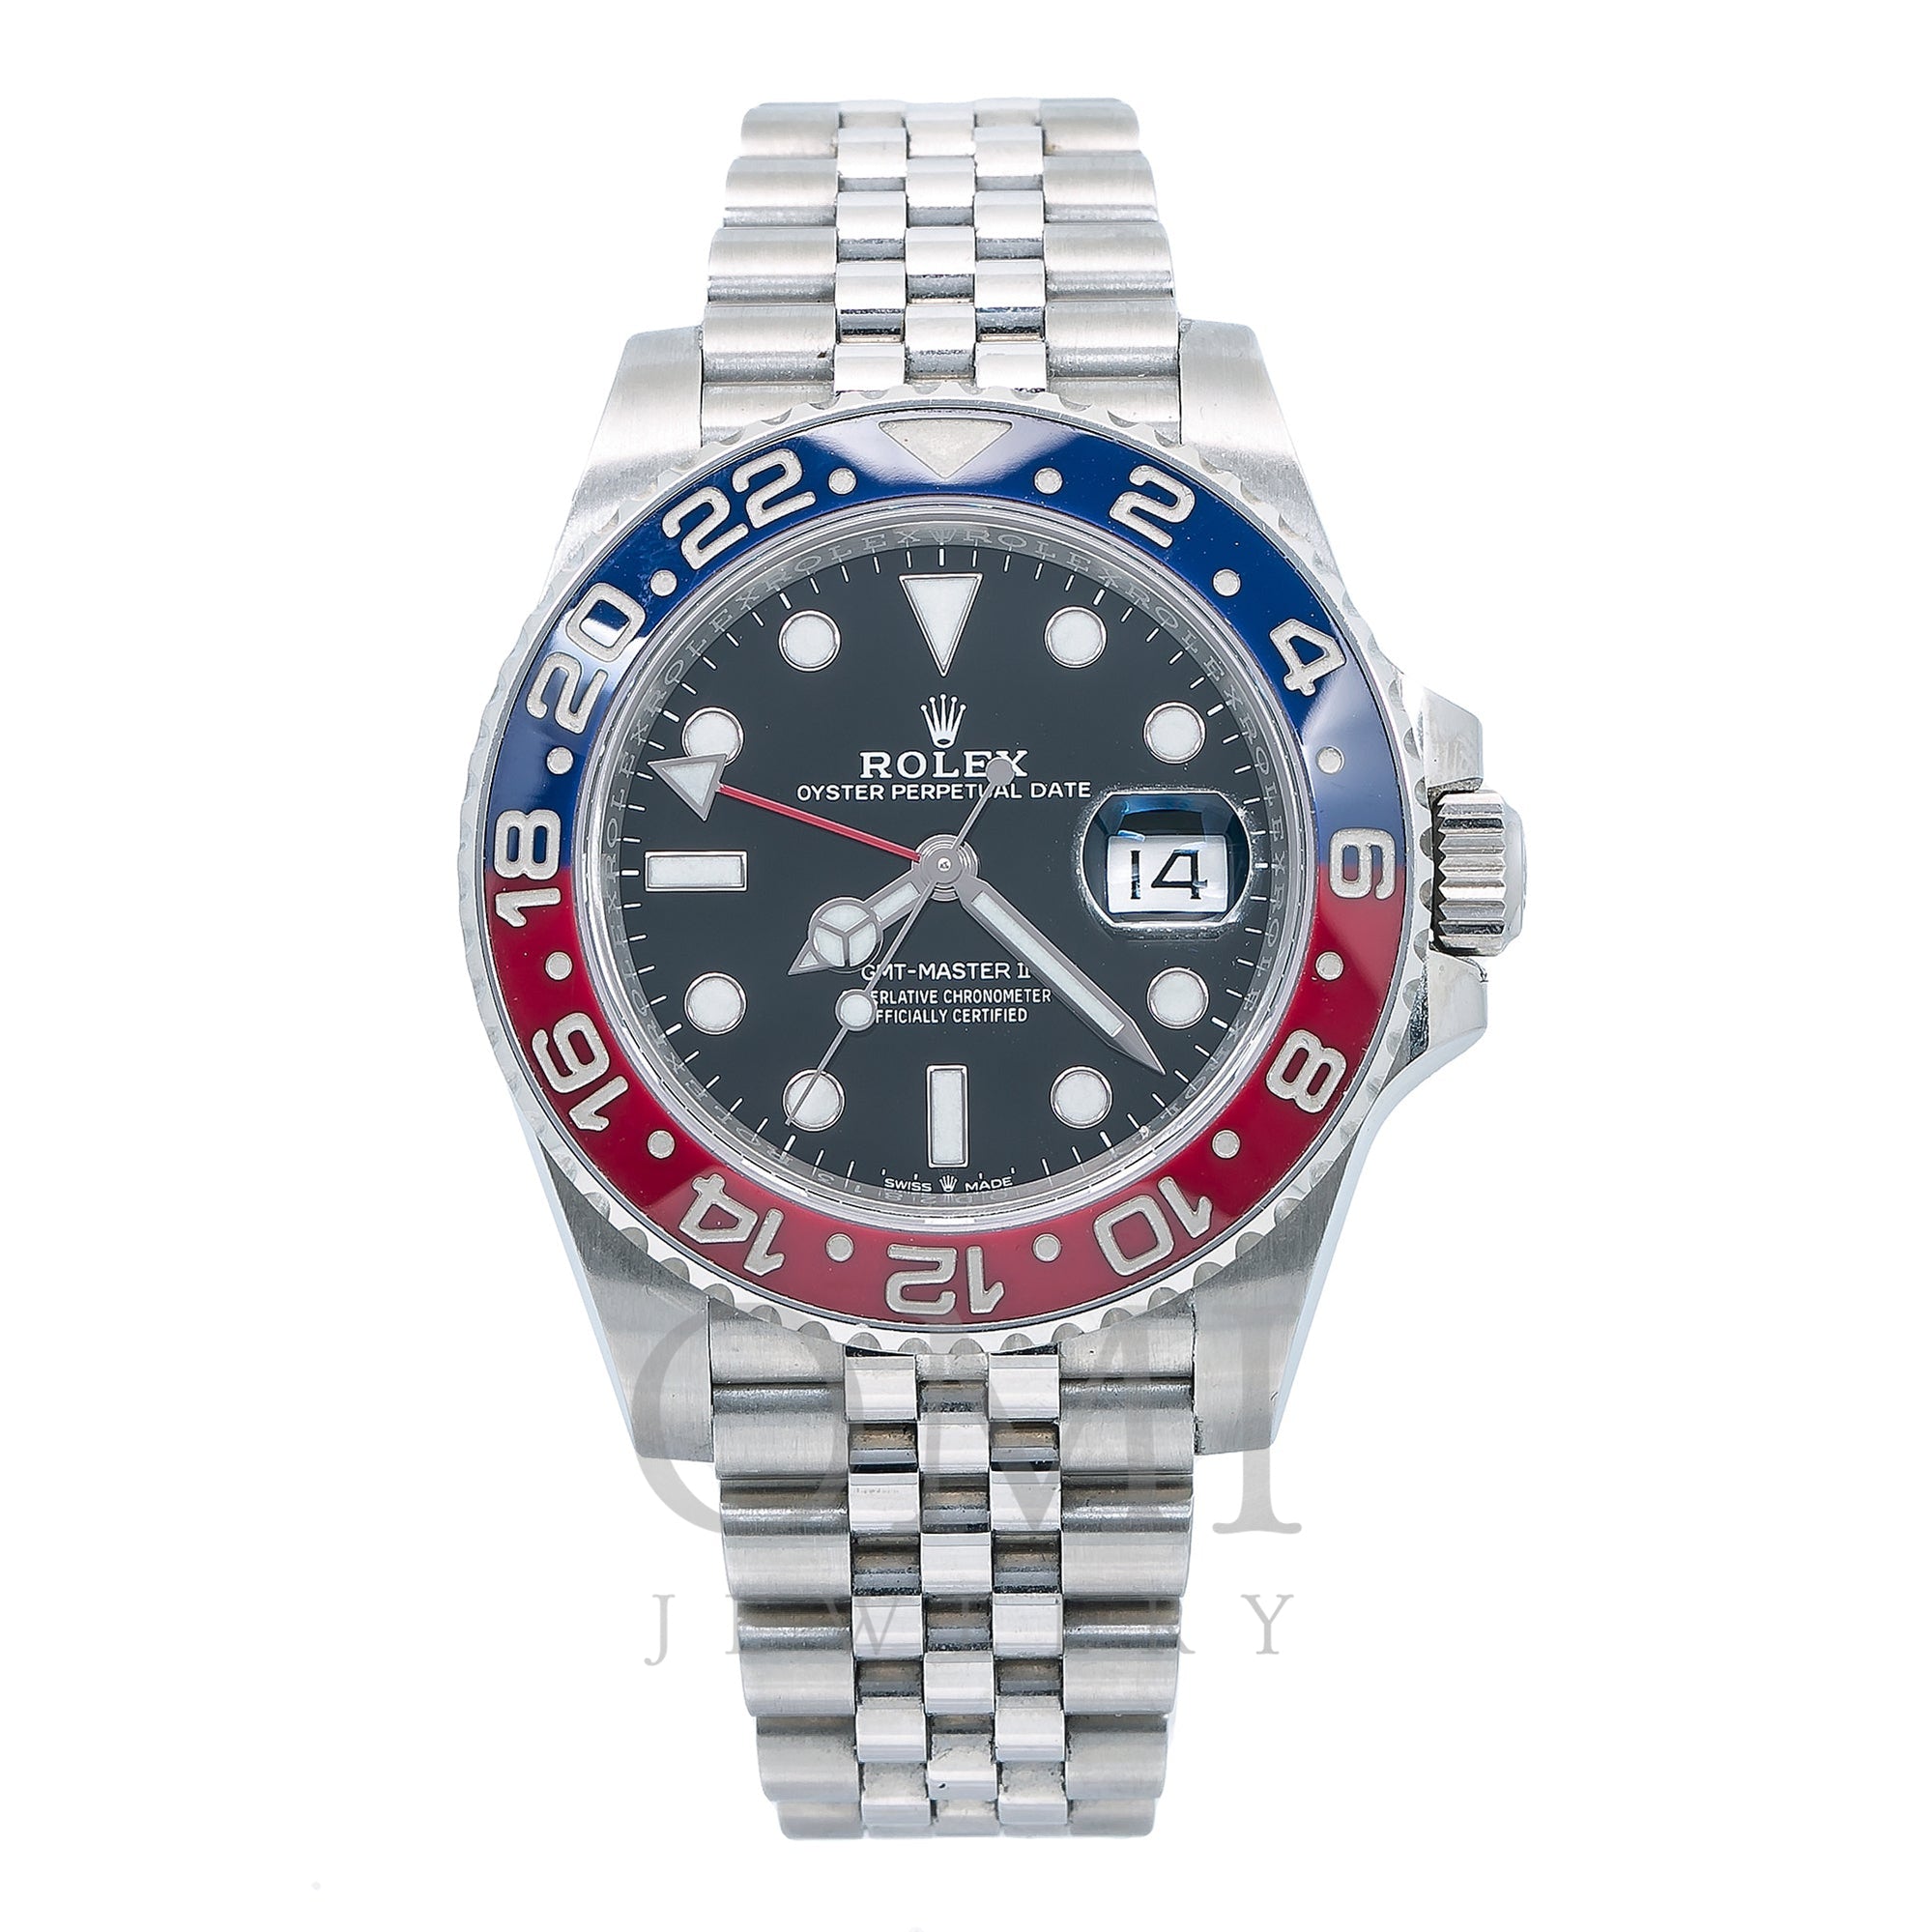 Rolex Master II Watch Blue and Red Bezel with Jubile - OMI Jewelry